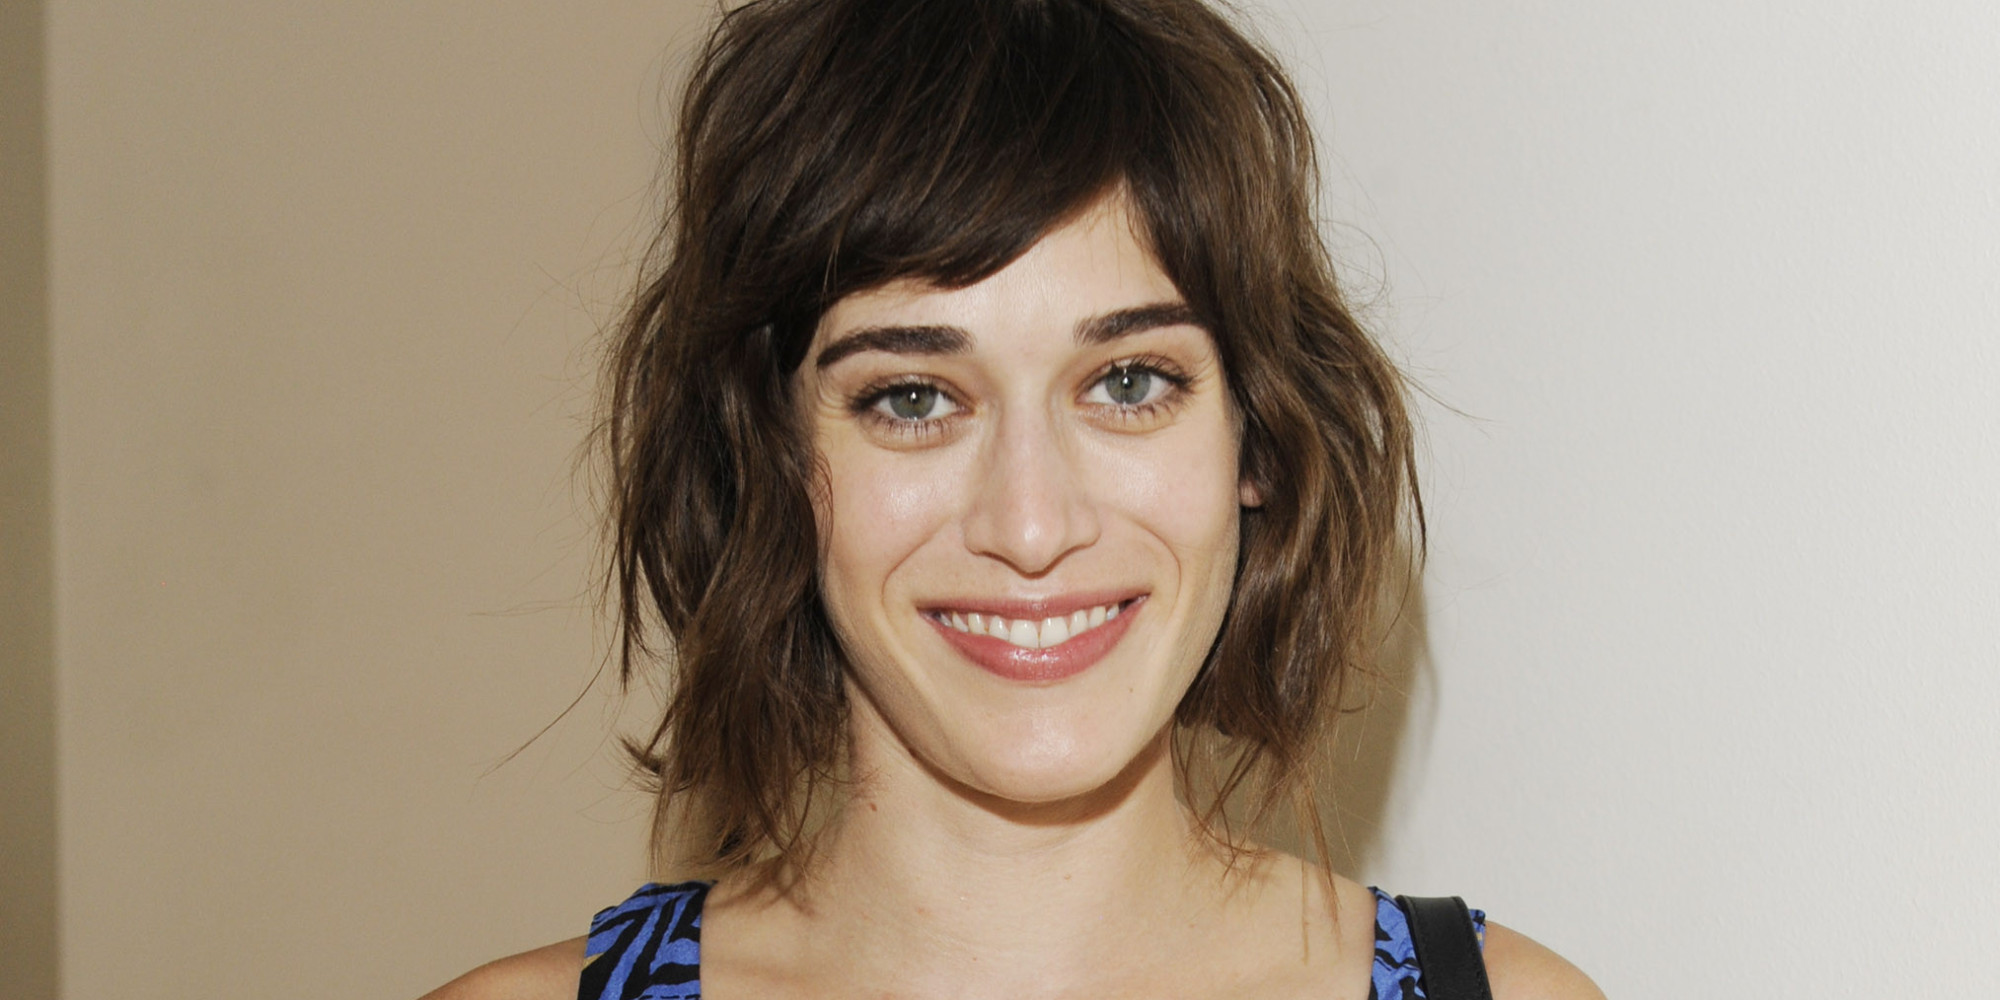 Lizzy Caplan Masters Of Sex Actress On What Its Really Like To Film Sex Scenes Huffpost 4128